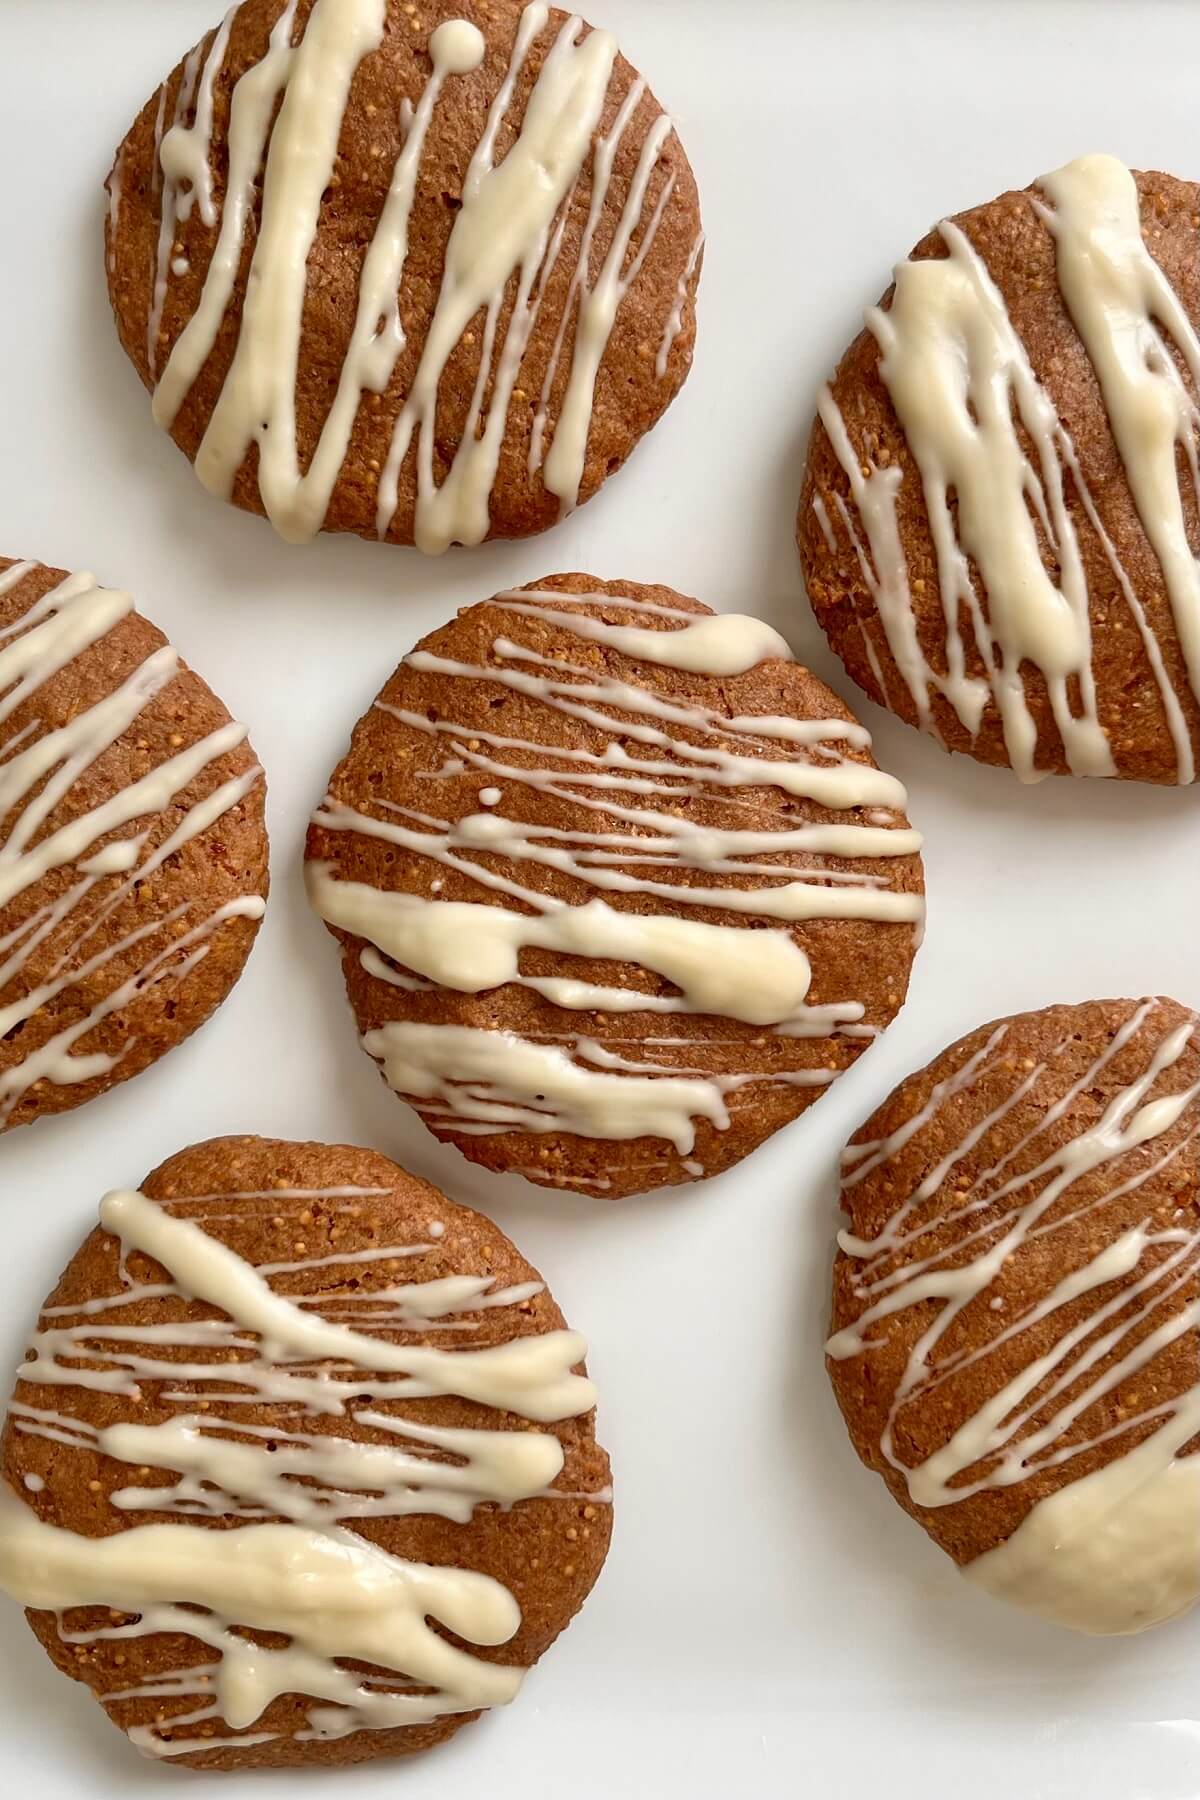 White chocolate drizzled cookies made with figs on a white plate.